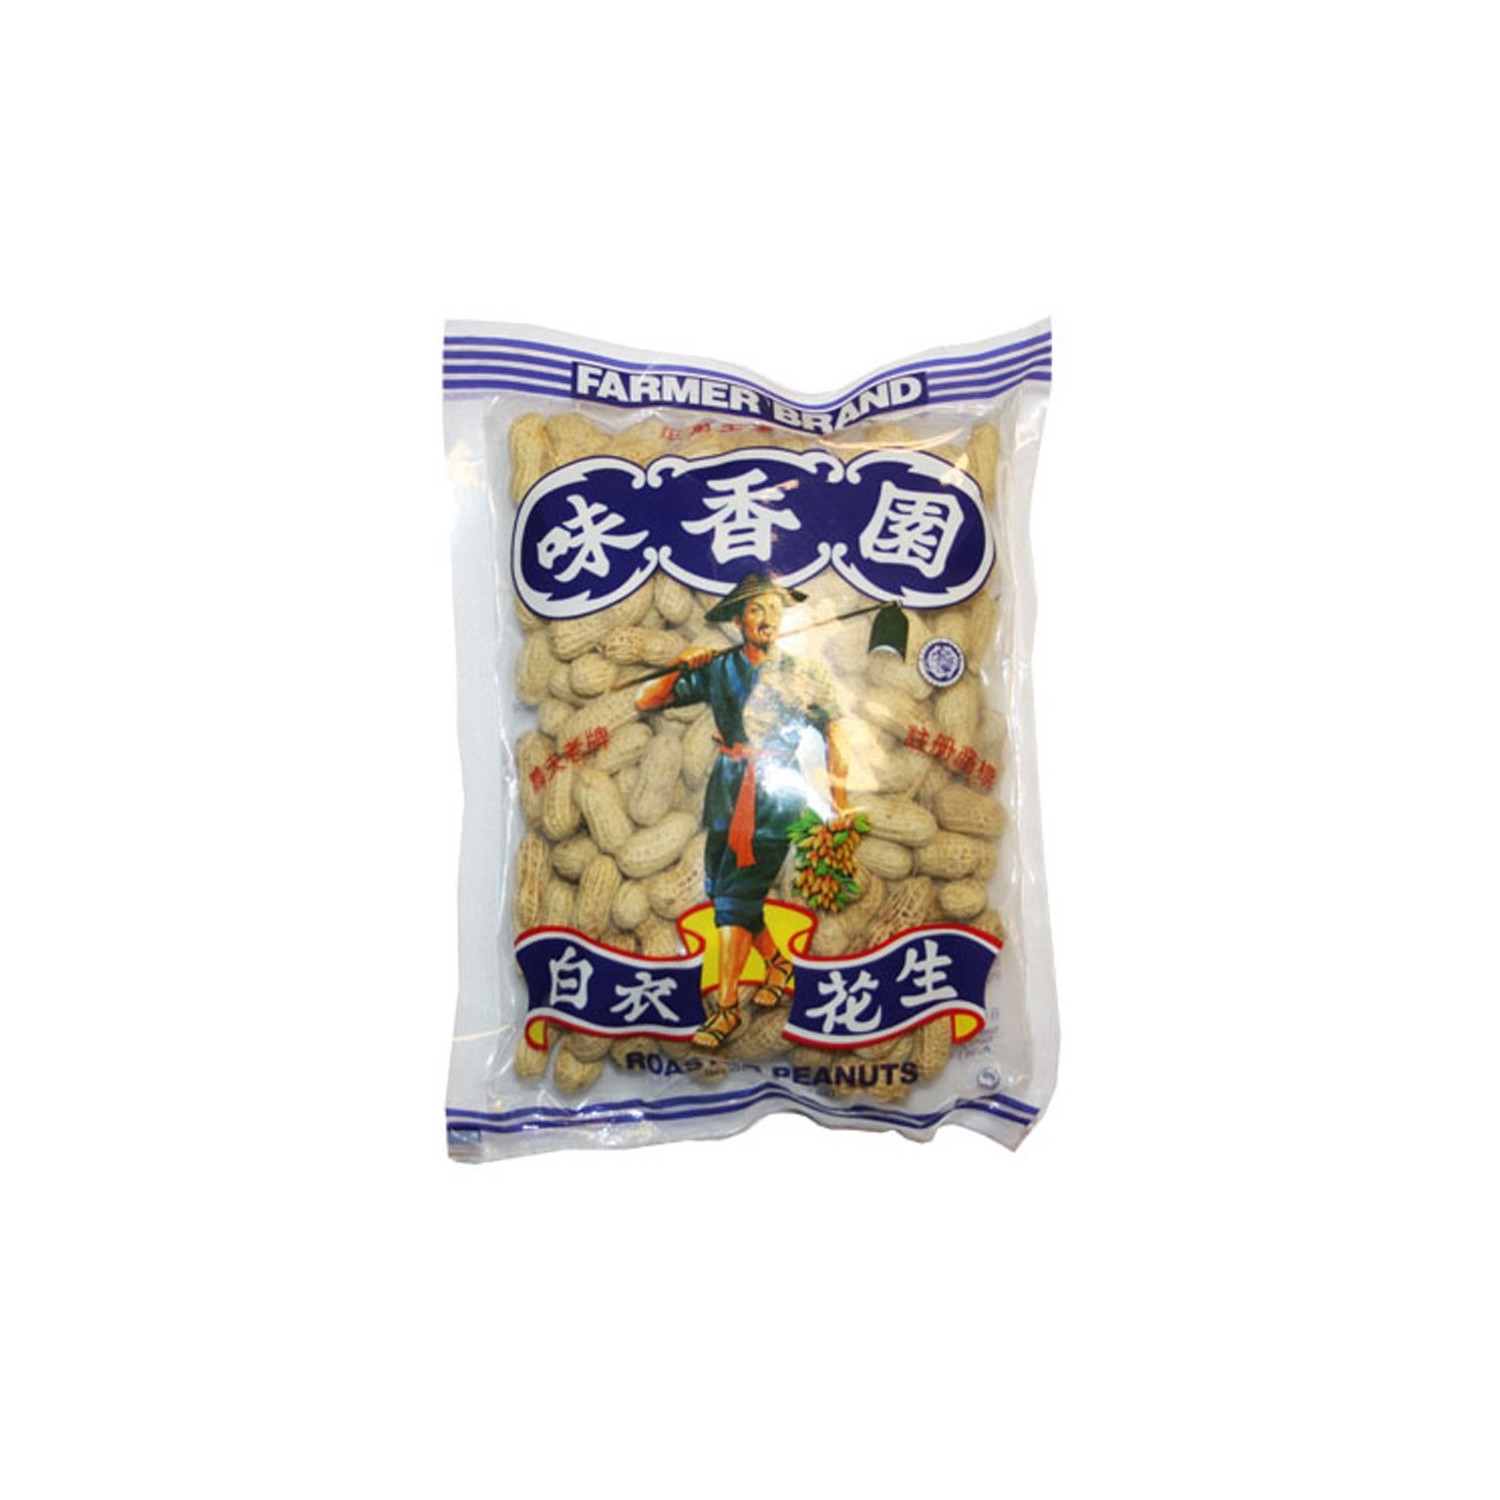 Roasted peanuts in Shell - 0082312123455